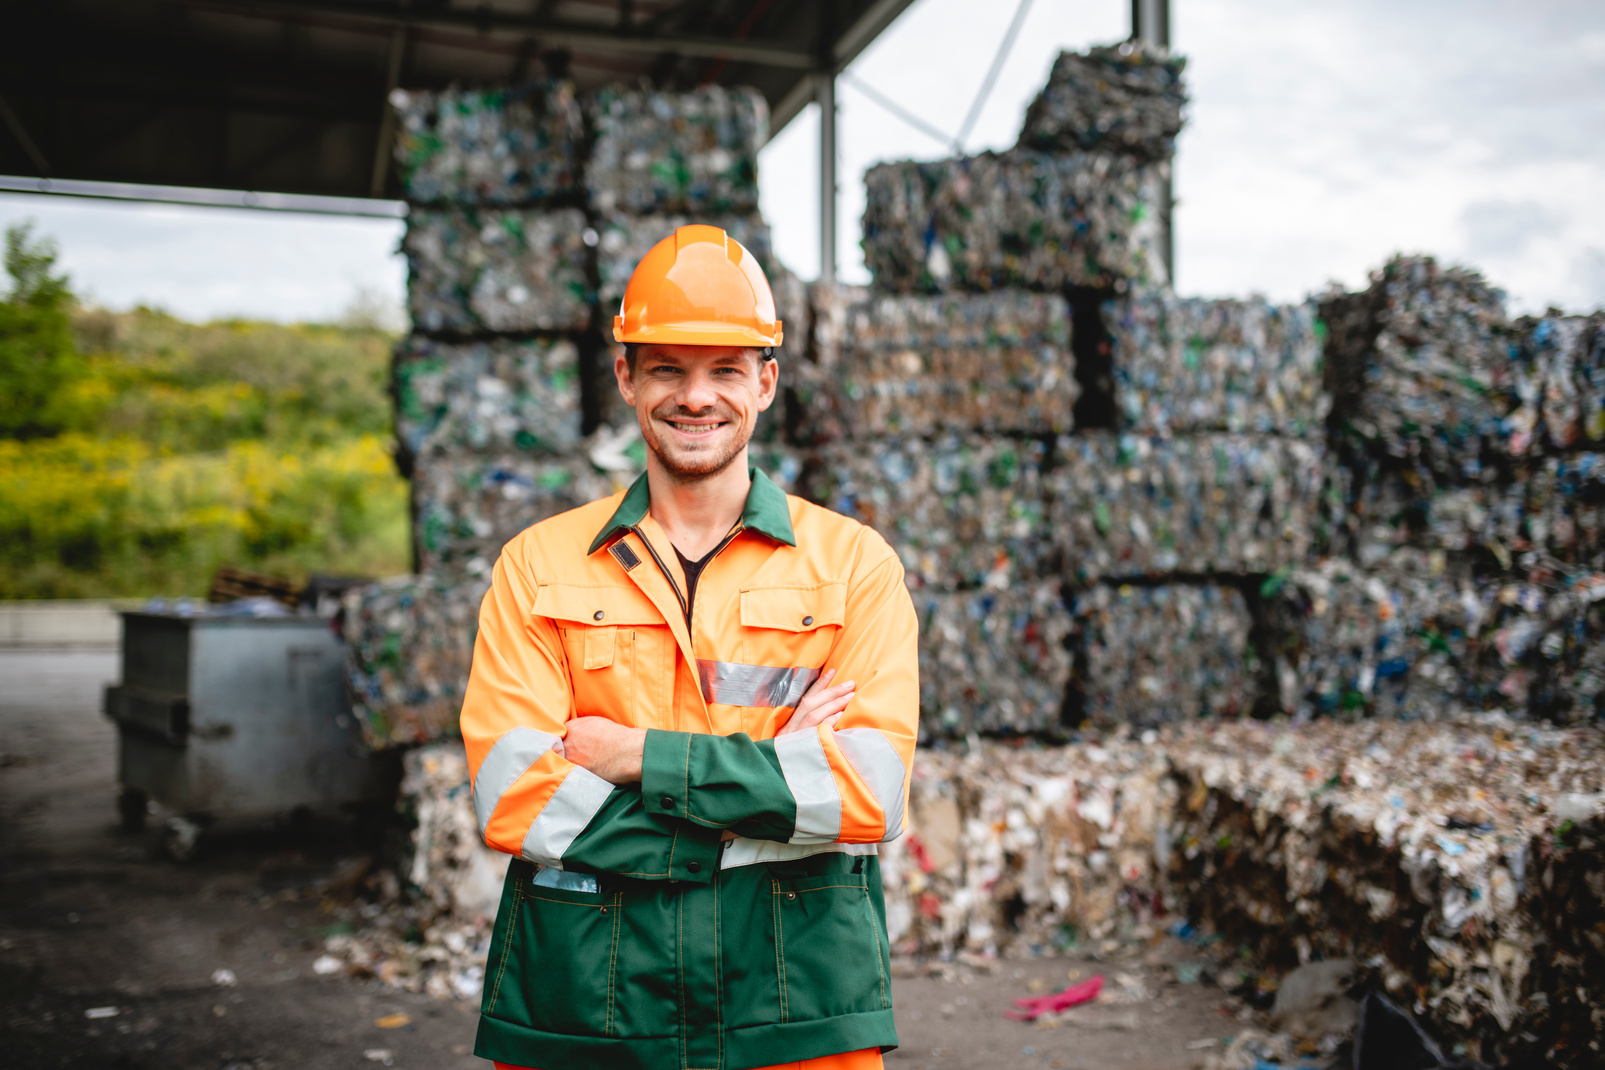 Smiling Workman Outdoors at Waste Management Facility